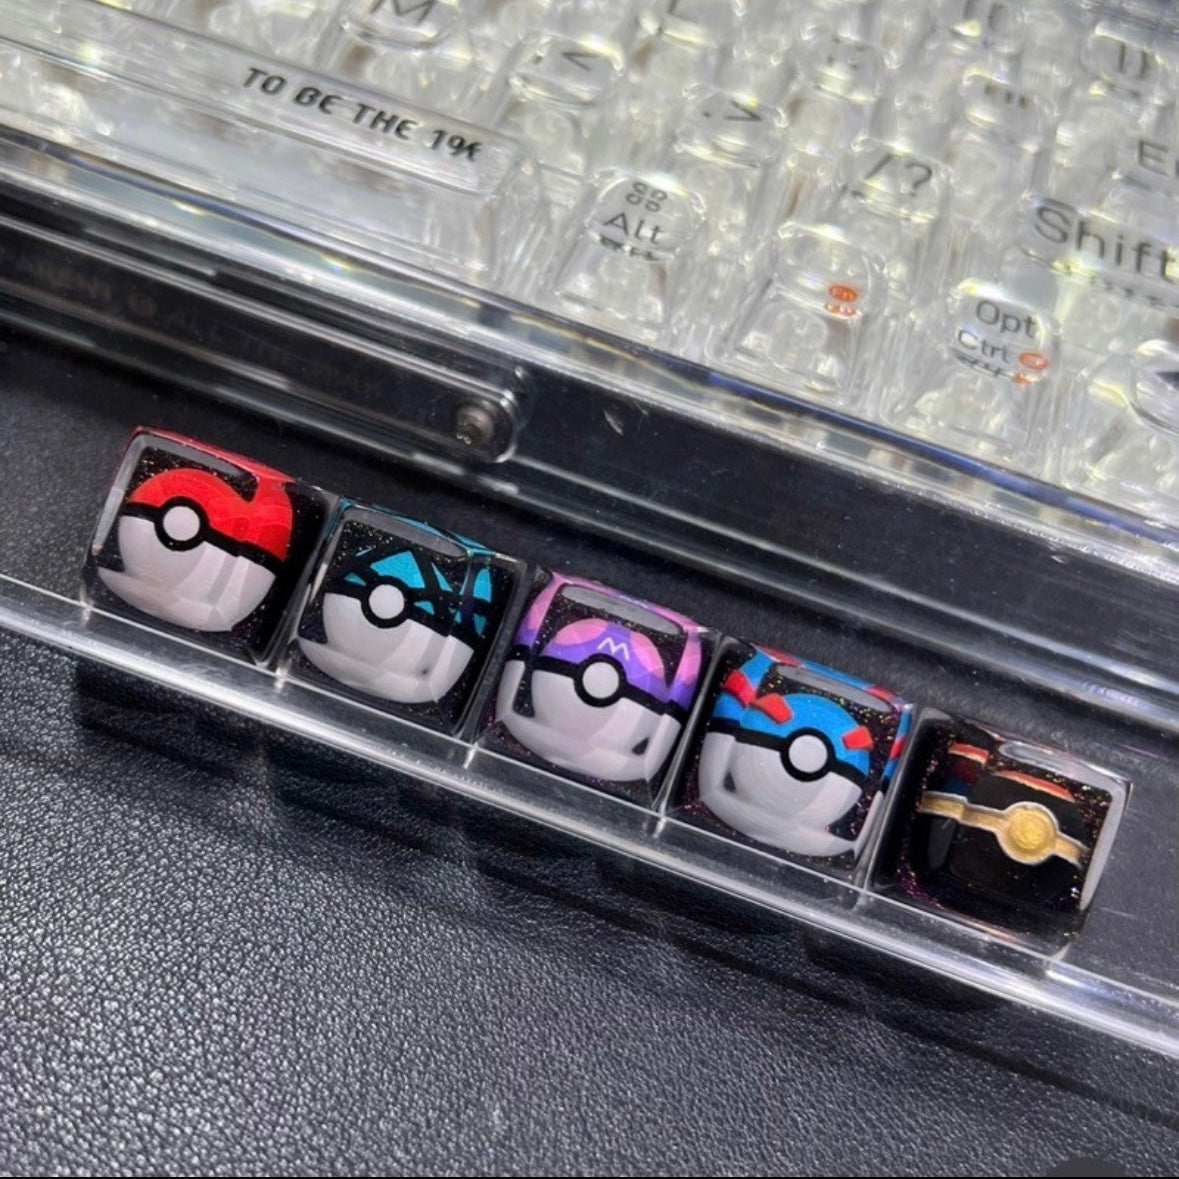 "Capture the essence of Pokémon with our 'Pokémon's Pokeball' Artisan Custom Keycaps. These meticulously crafted keycaps pay homage to the iconic Pokéball design, adding a playful touch to your keyboard. Each keycap is a unique collectible, showcasing your love for the Pokémon universe. Elevate your keyboard setup with these delightful artisan keycaps and embark on a typing adventure." ⚡🔴💻 #KeyboardAccessories #ArtisanKeycaps #PokémonLove